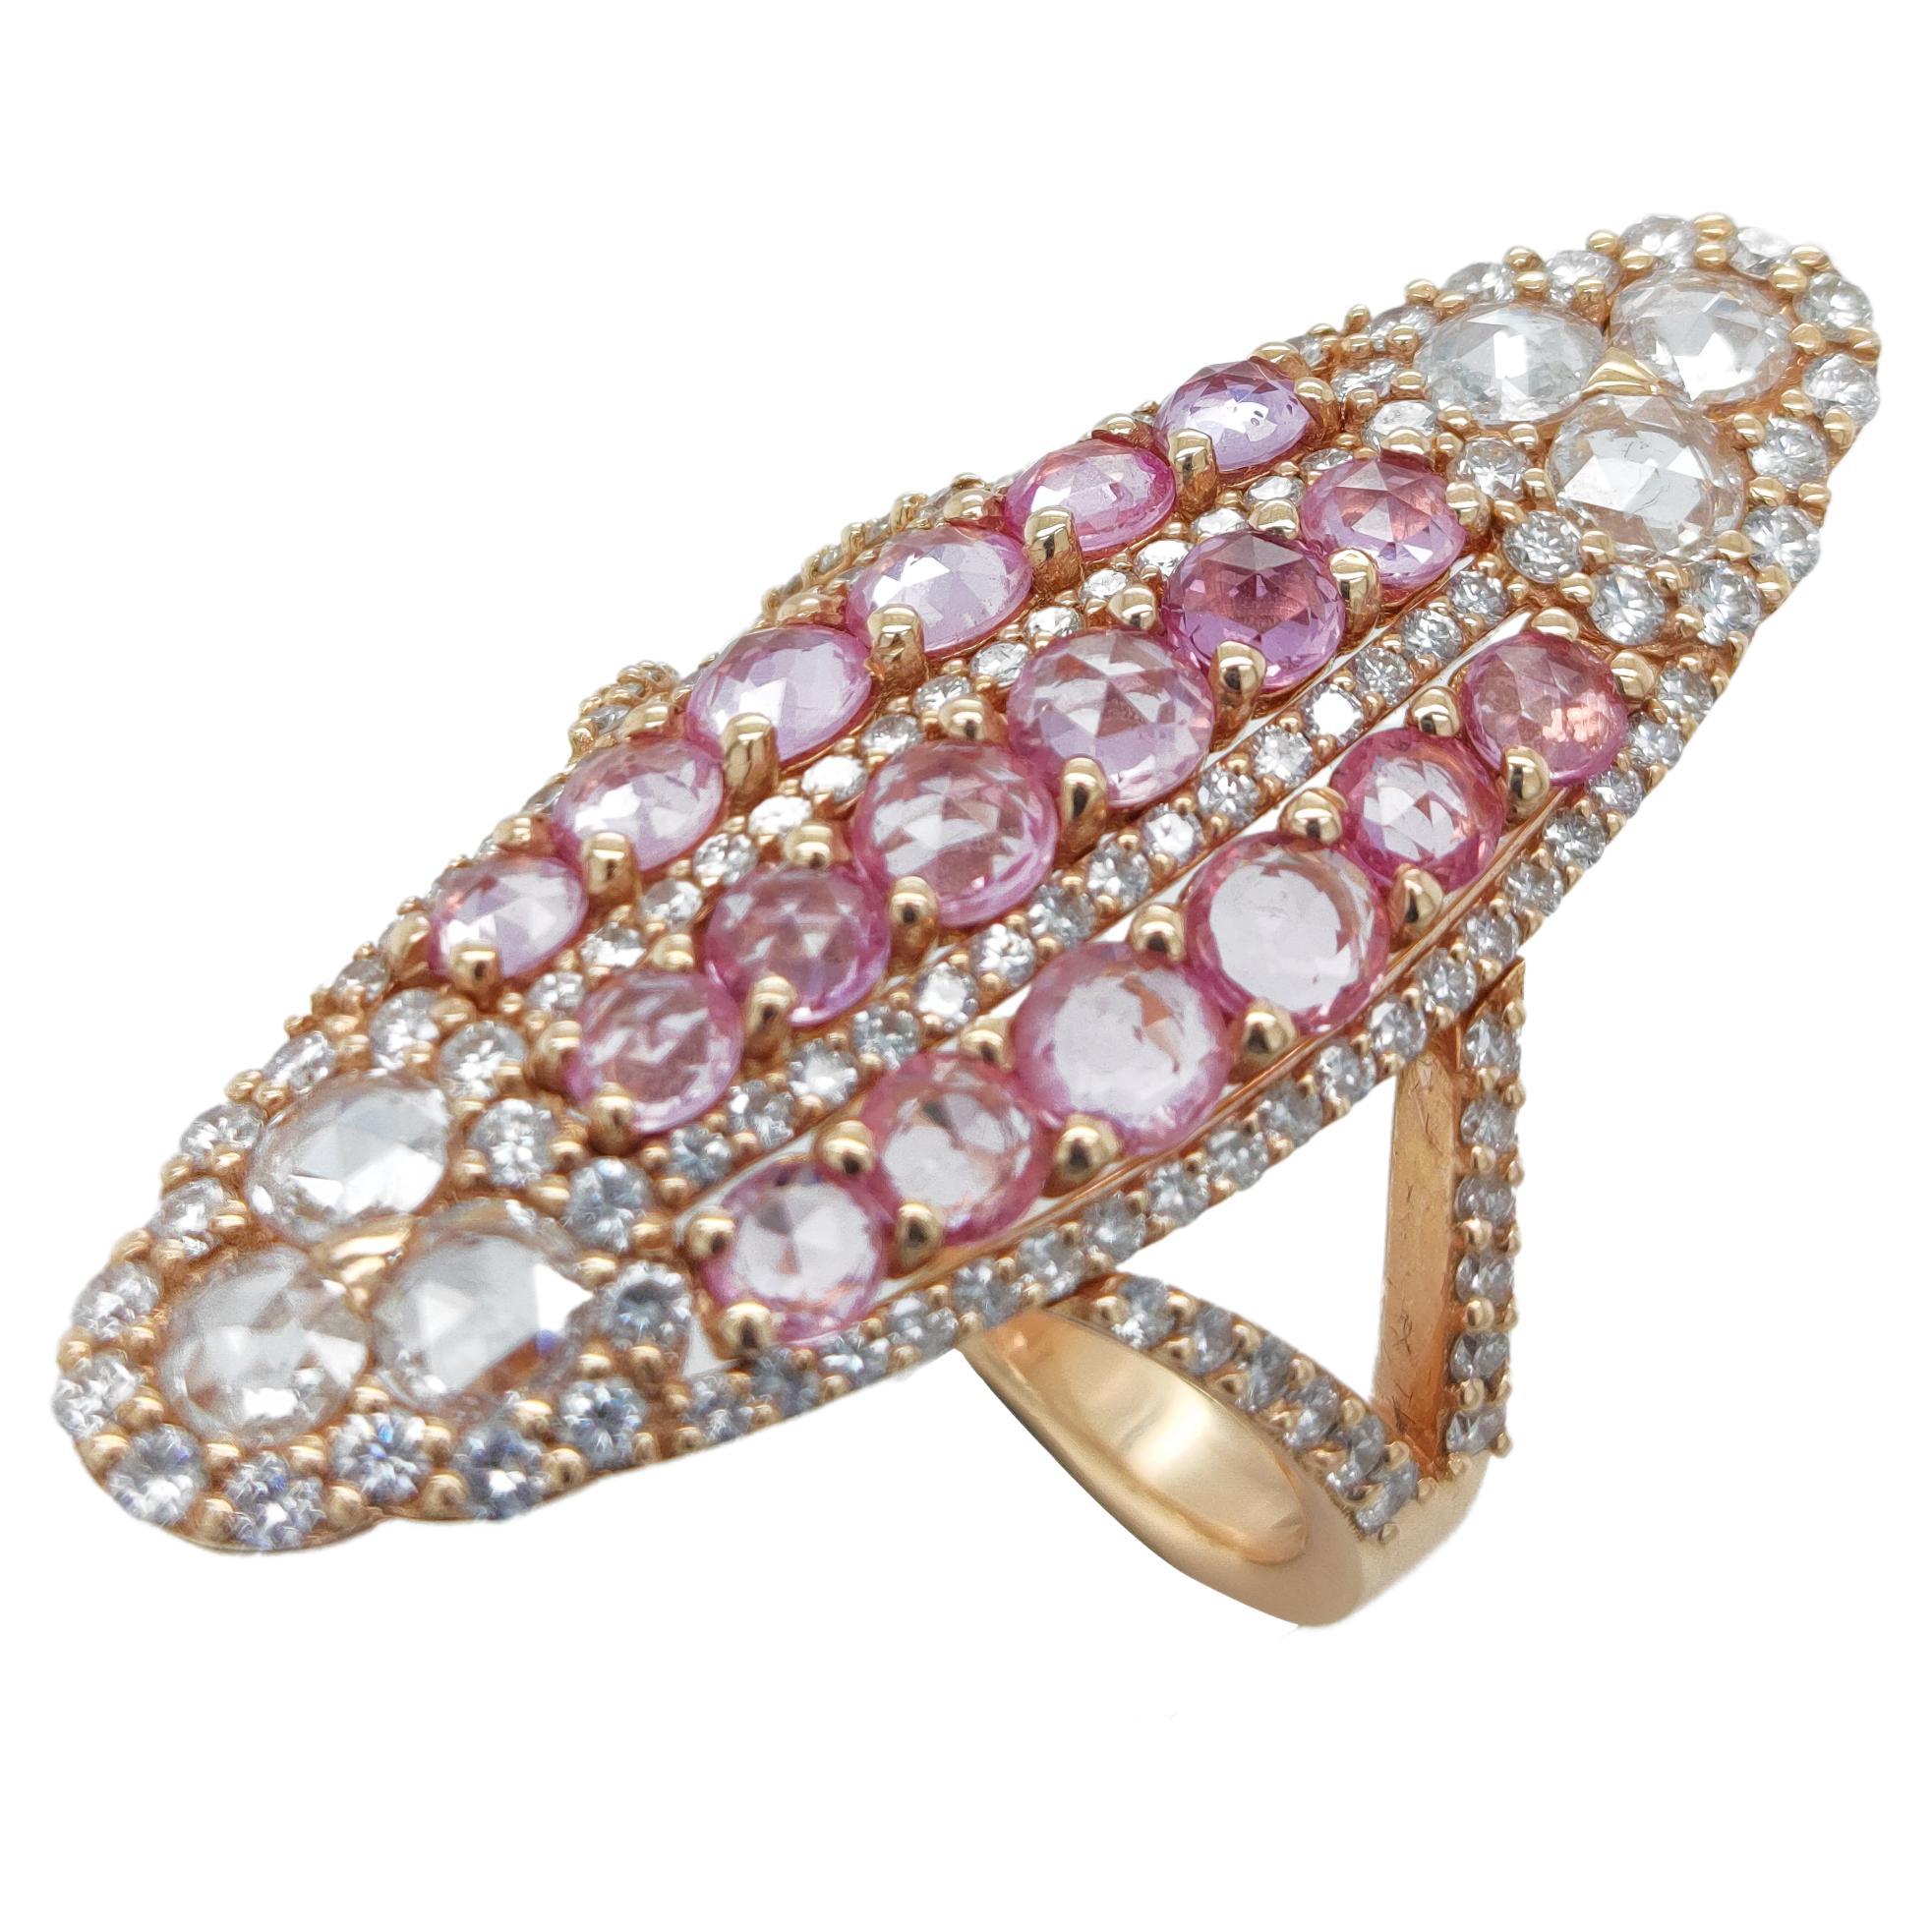 Cocktail ring in 18Kt White Gold, 1, 75 cts Diamonds & 2, 35 cts Pink Sapphires For Sale